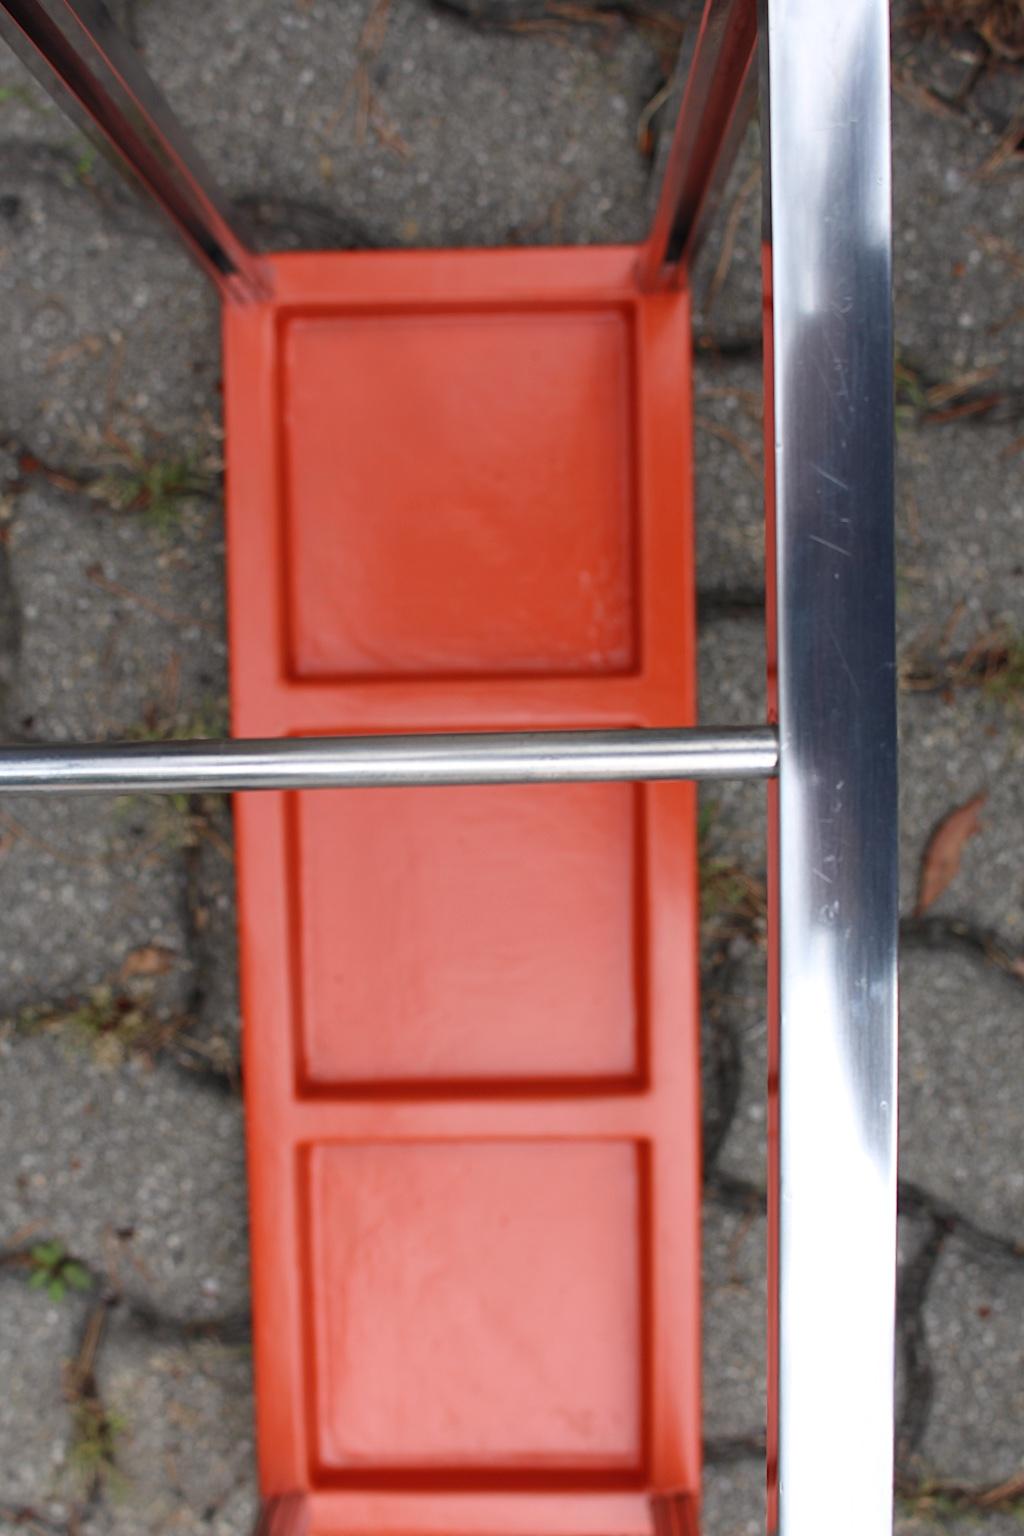 Bauhaus Art Deco Vintage Red Silver Aluminum Umbrella Stand, 1930s, Germany For Sale 12